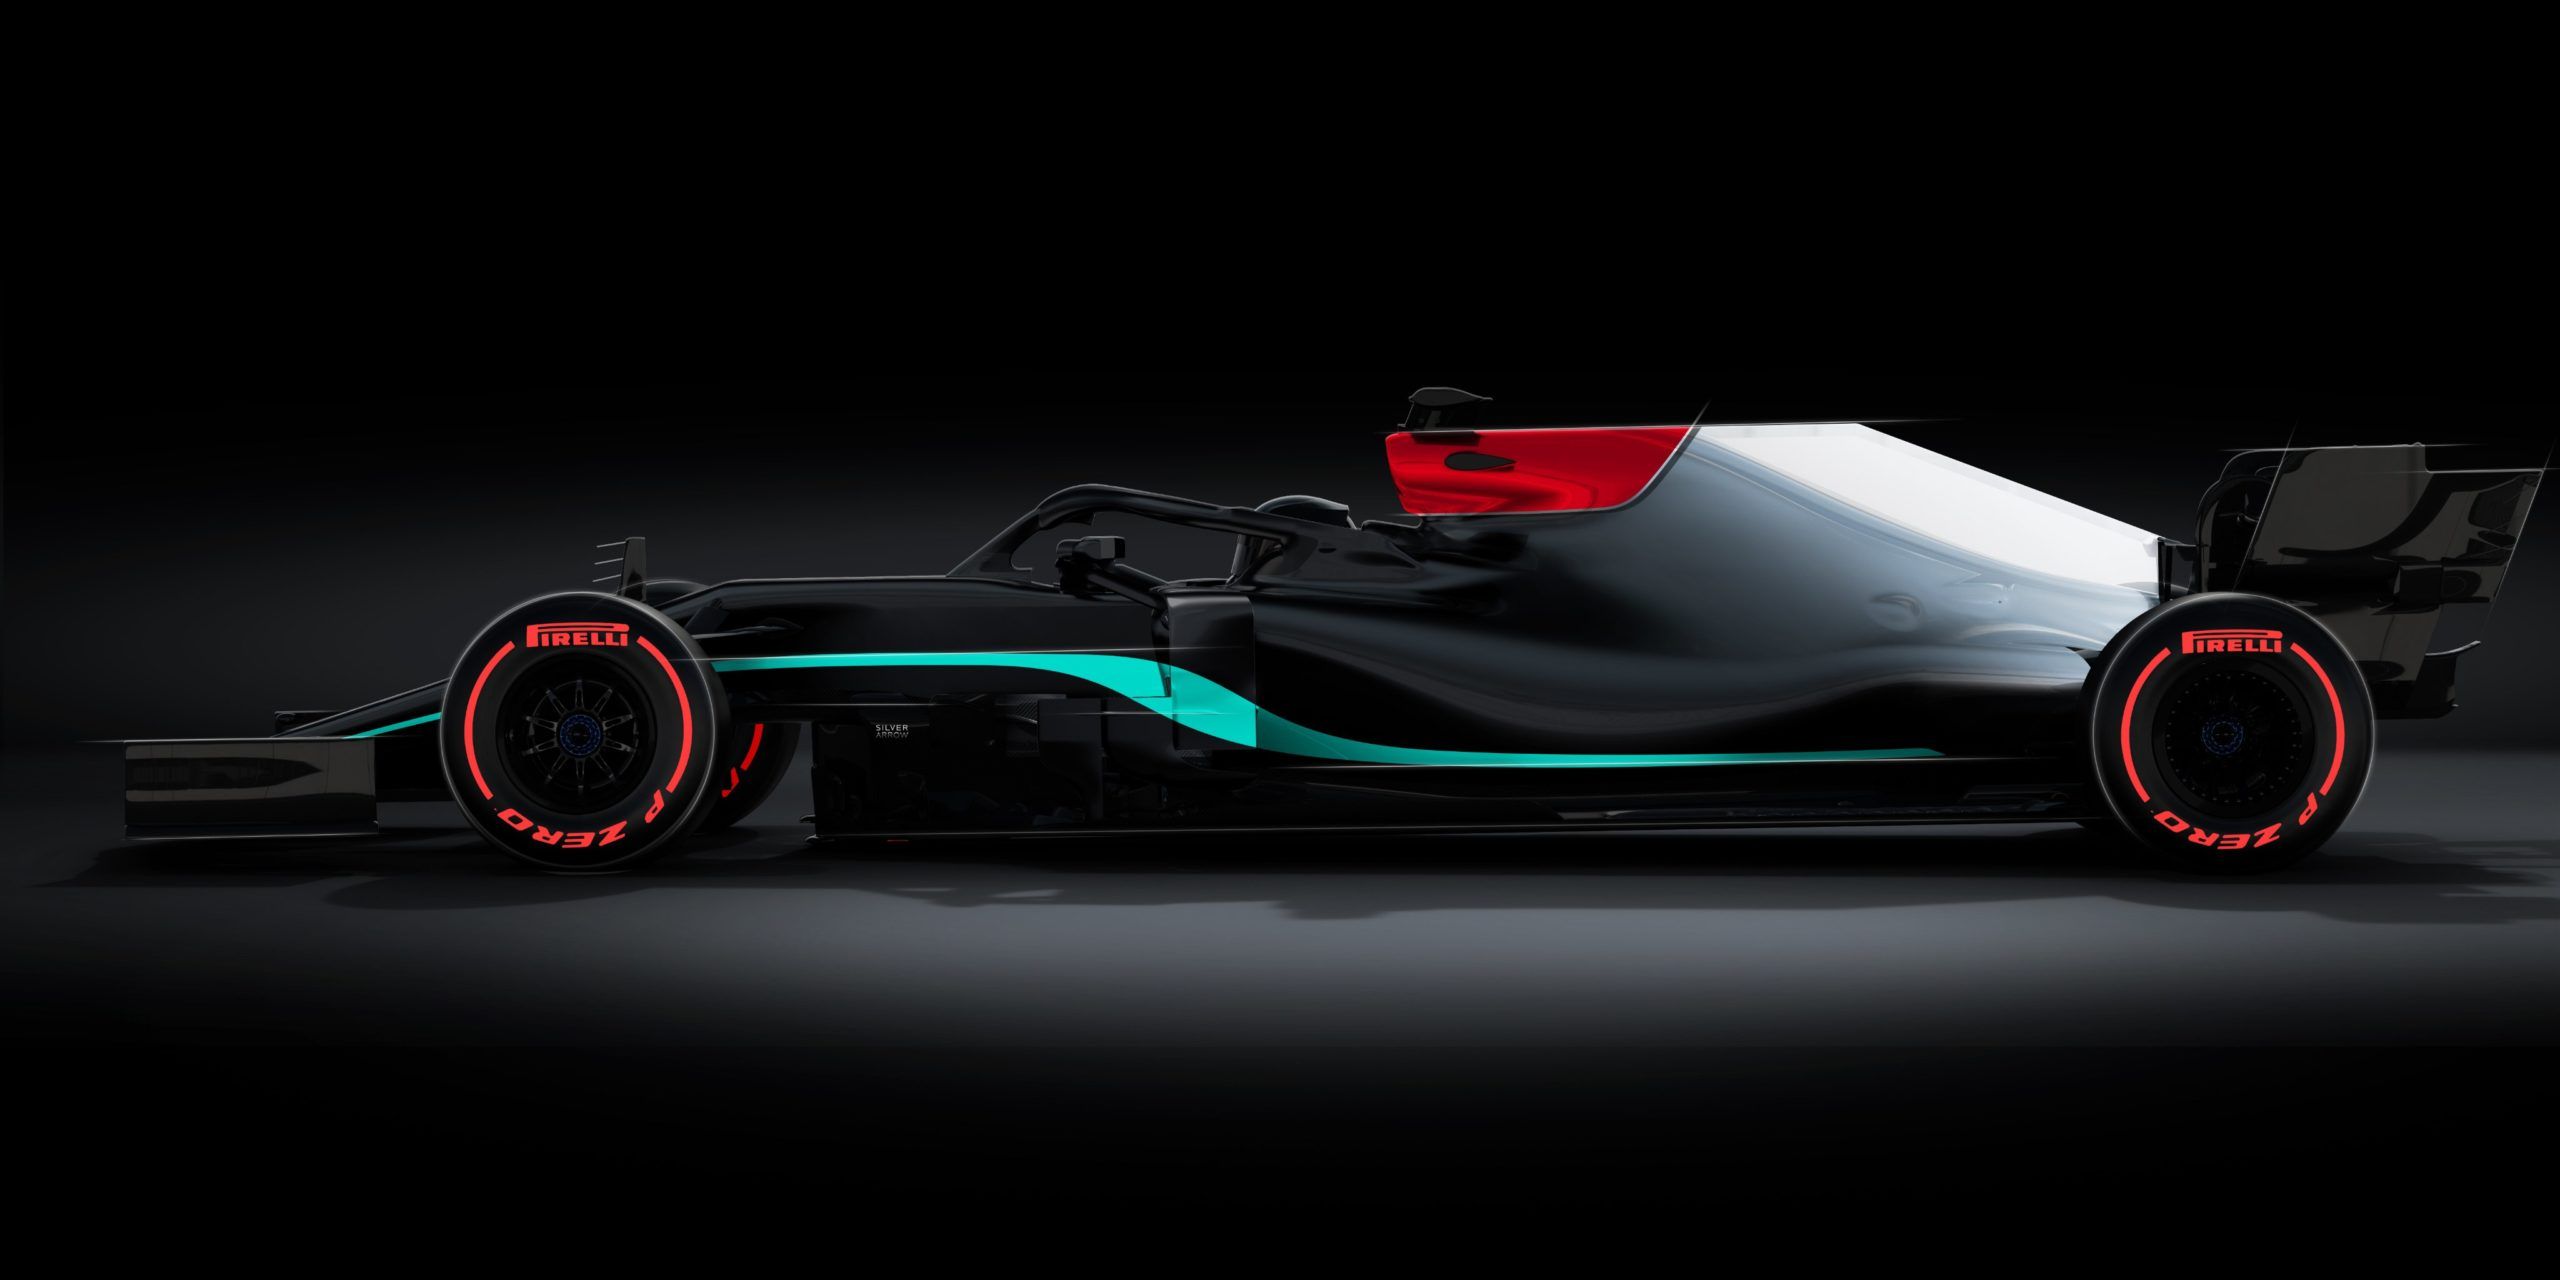 Photo: Mercedes teases with full 2021 F1 livery render ahead of launch